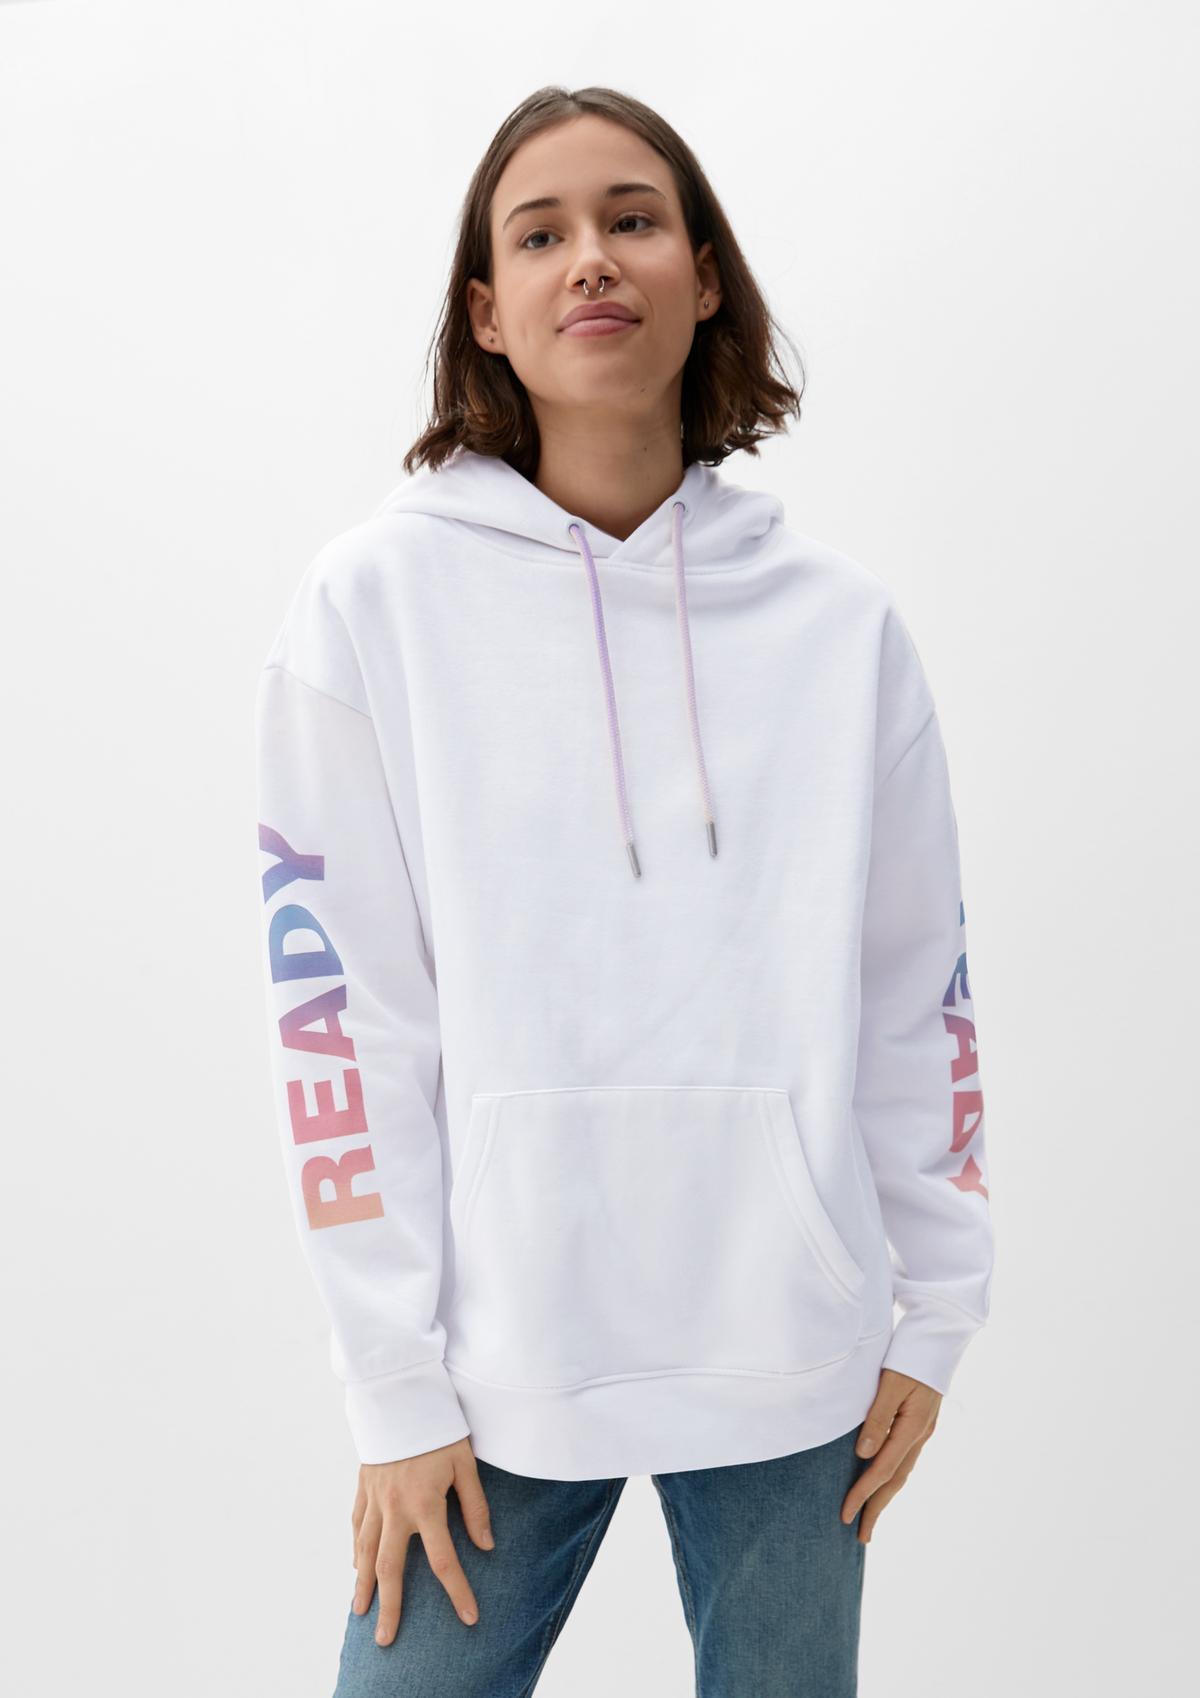 with sweatshirt a - back white Hooded print